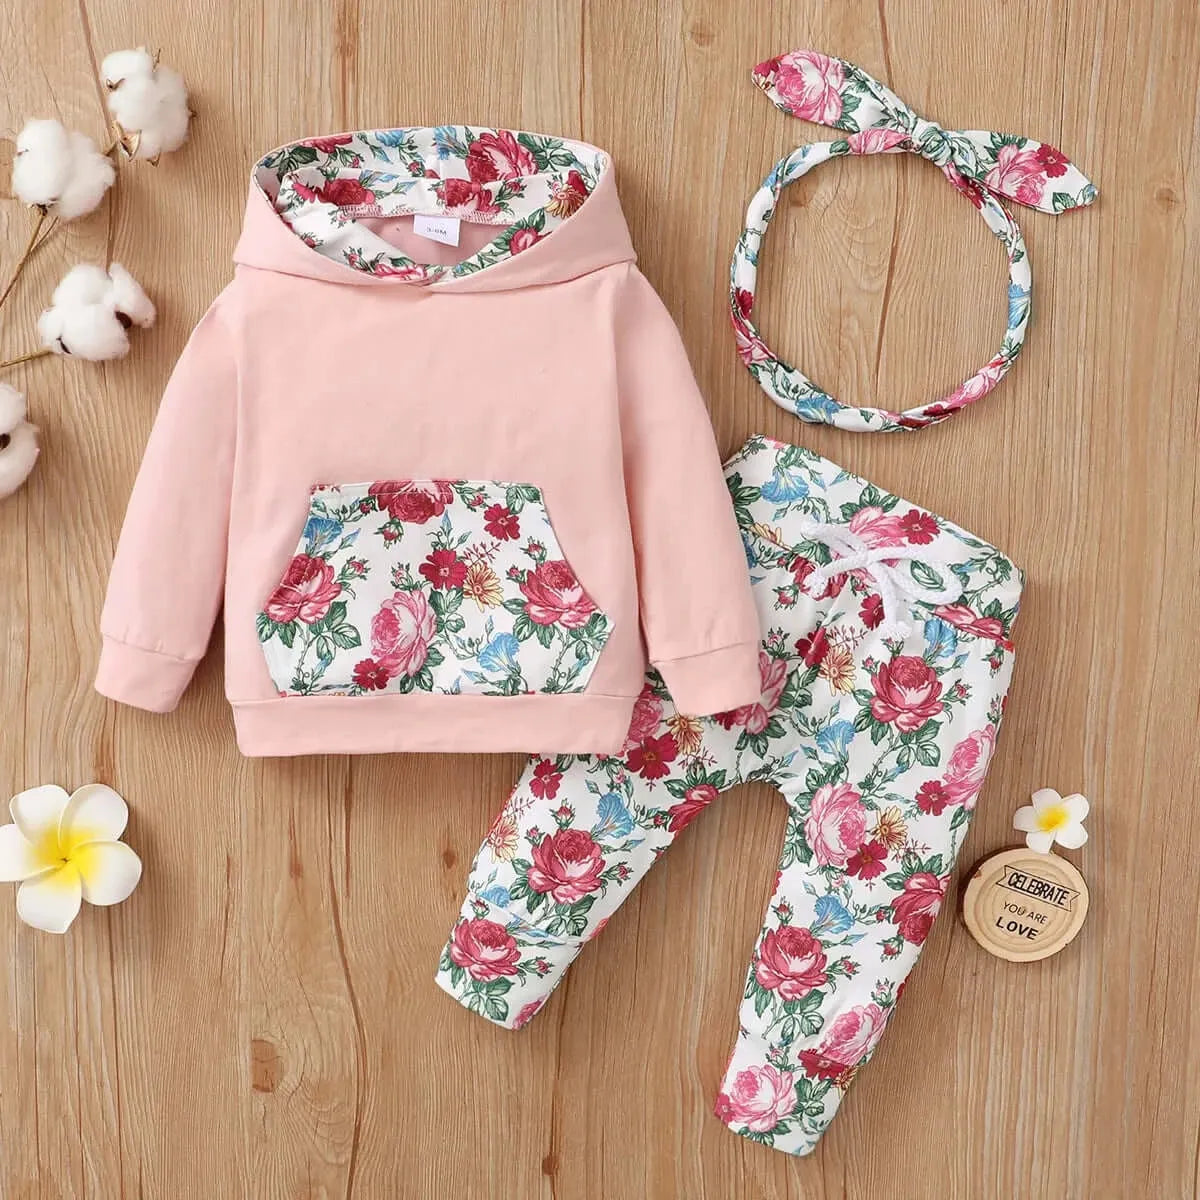 Infant Baby Girls Autumn Outfits Long Sleeve Big Pockets Hoodies + Floral Print Long Pants + Headband 3 Pieces set